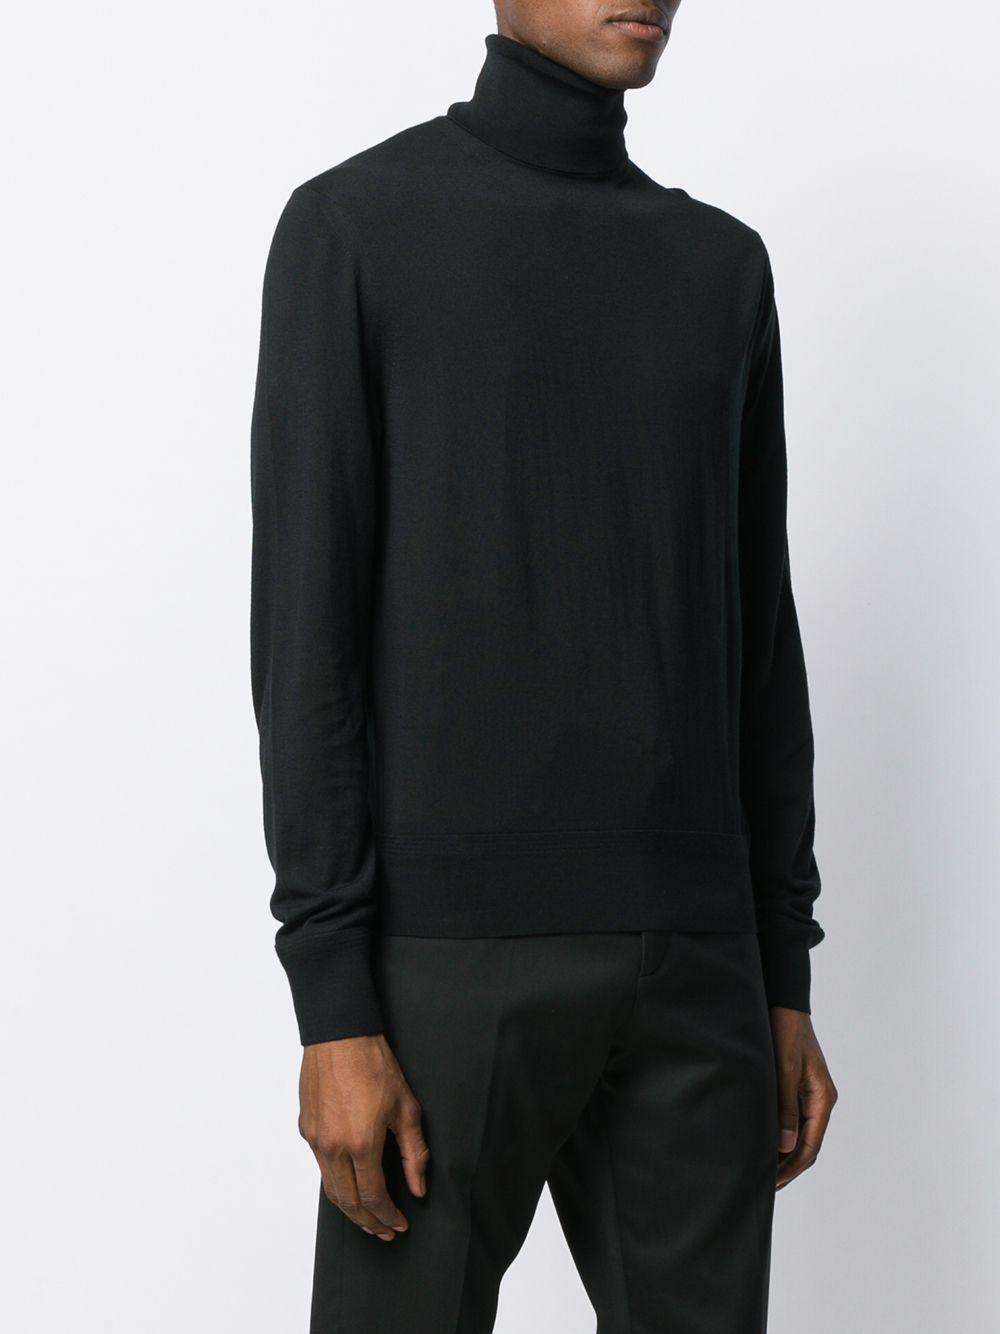 Tom Ford Wool Turtleneck Knitted Sweater in Black for Men - Lyst